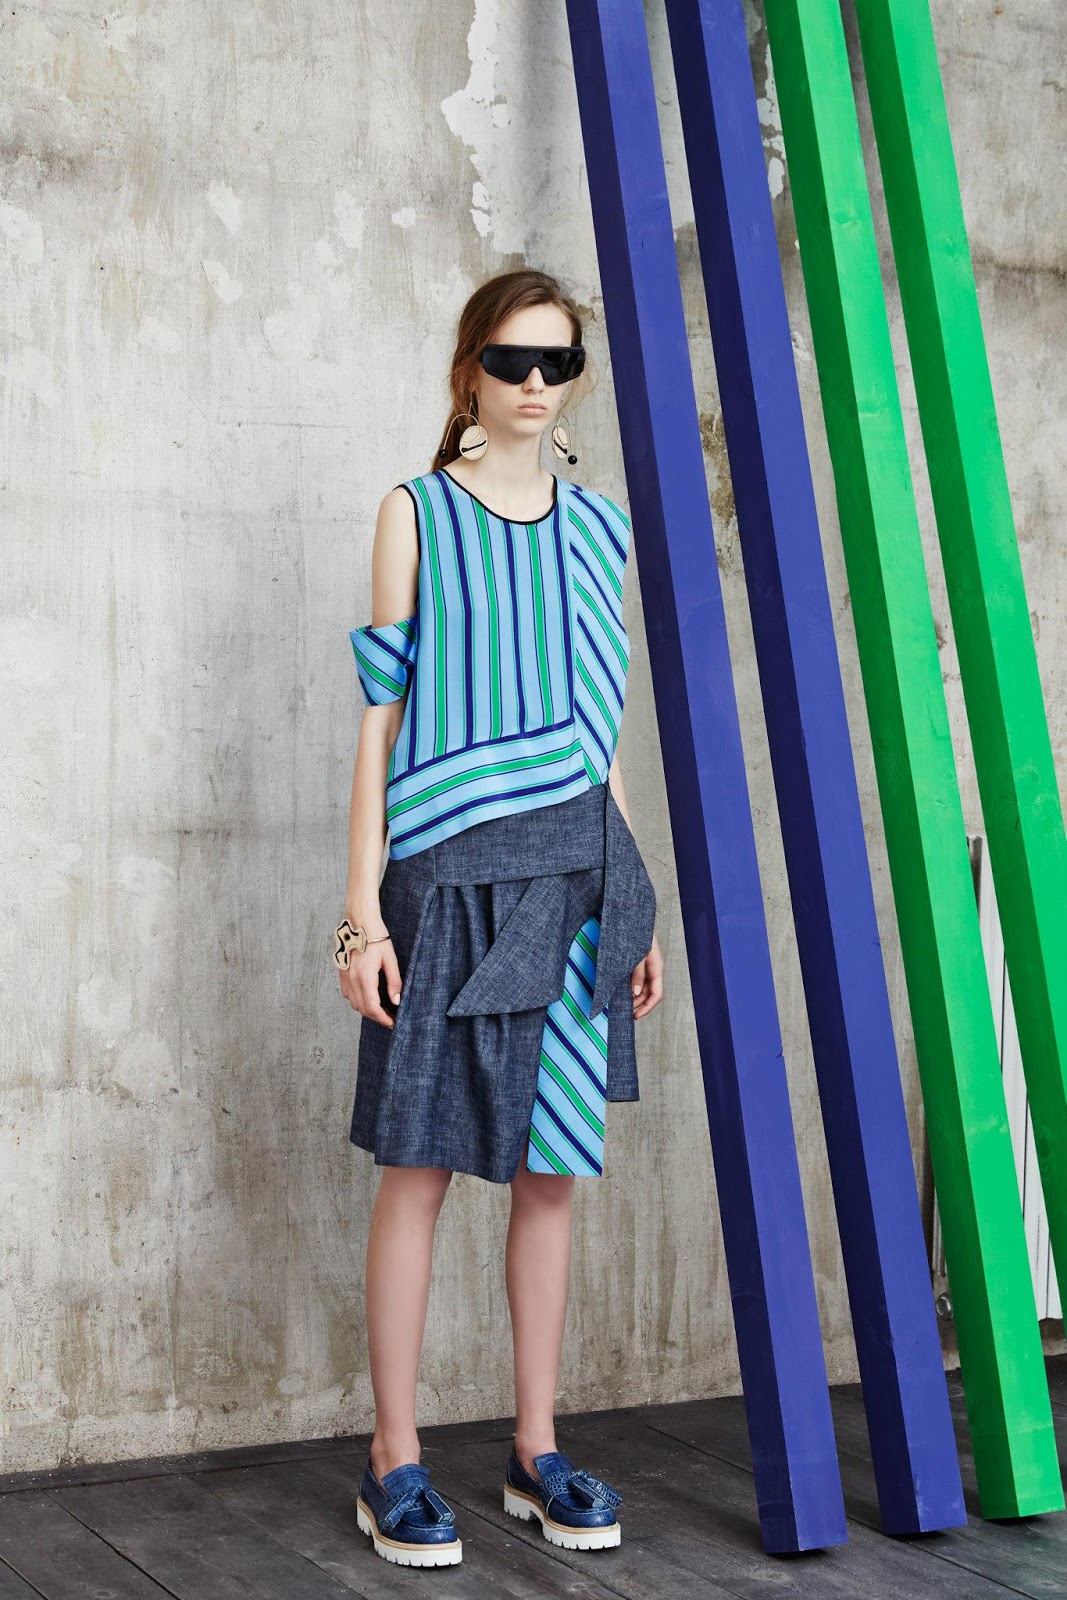 The Well-Appointed Catwalk: MSGM Resort 2016